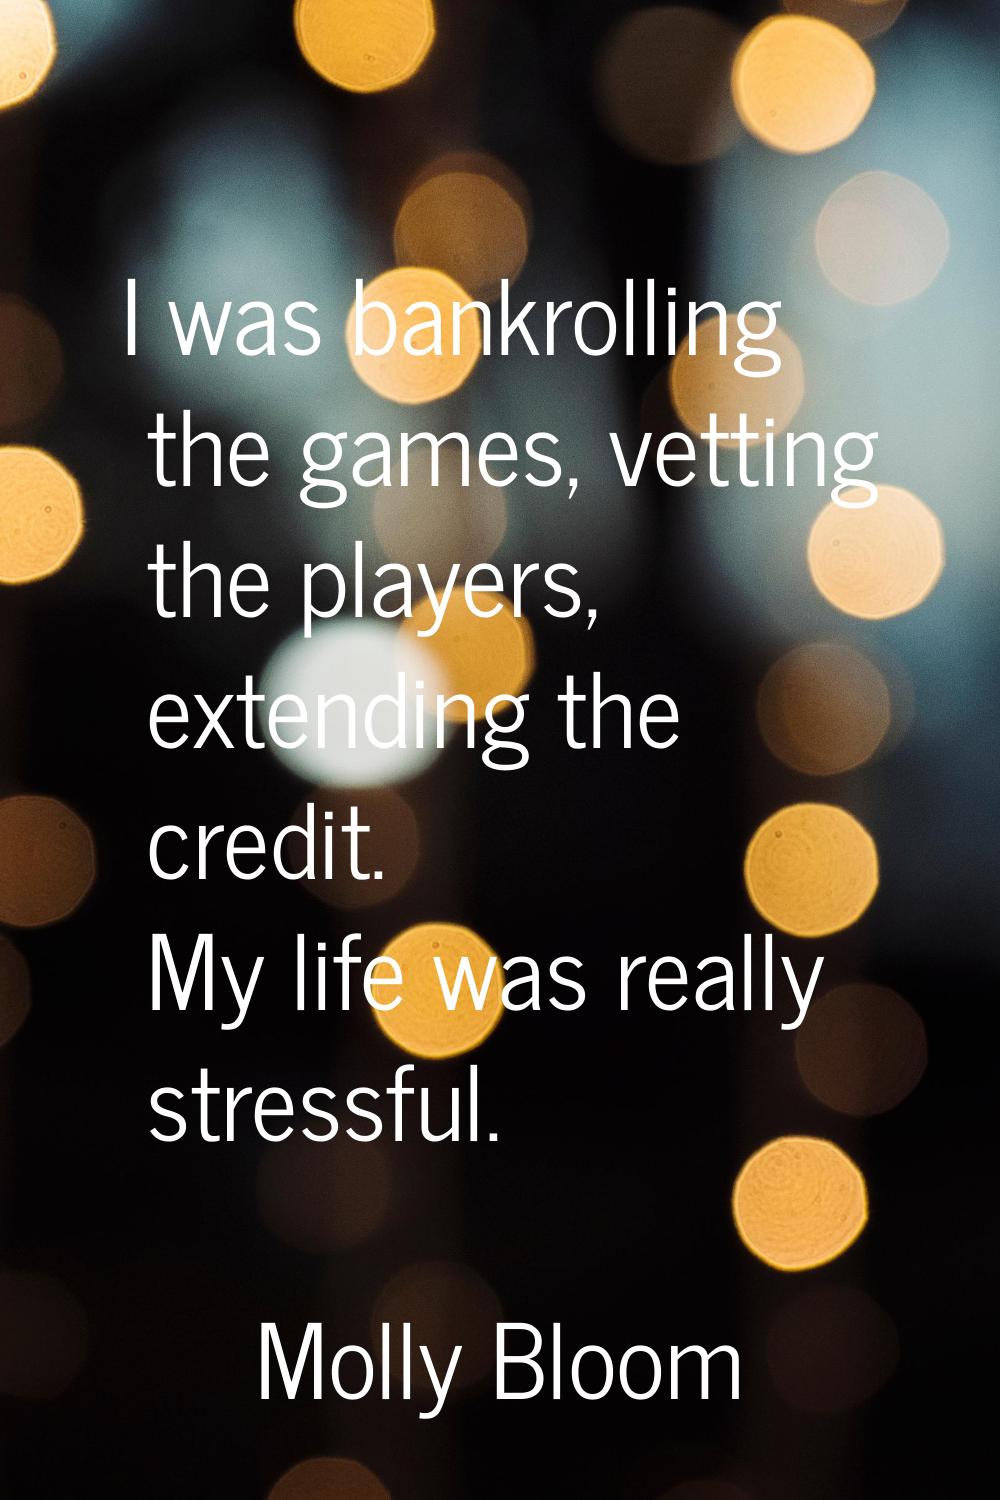 I was bankrolling the games, vetting the players, extending the credit. My life was really stressfu